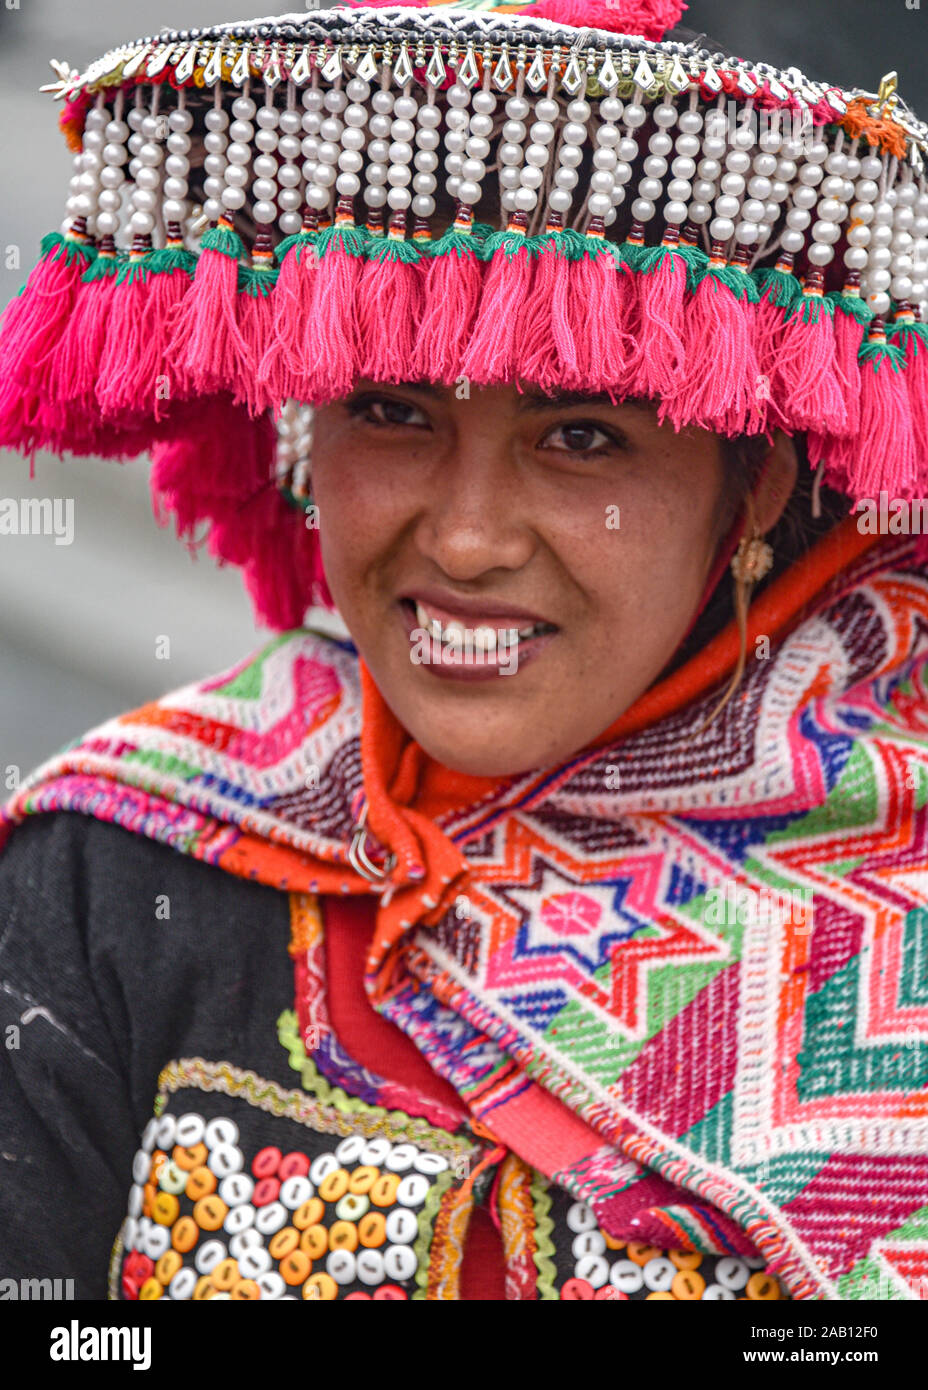 Lima, Peru - Nov 17, 2019:  An Andean girl dressed in traditional clothing for a procession in Lima's Plaza de Armas Stock Photo